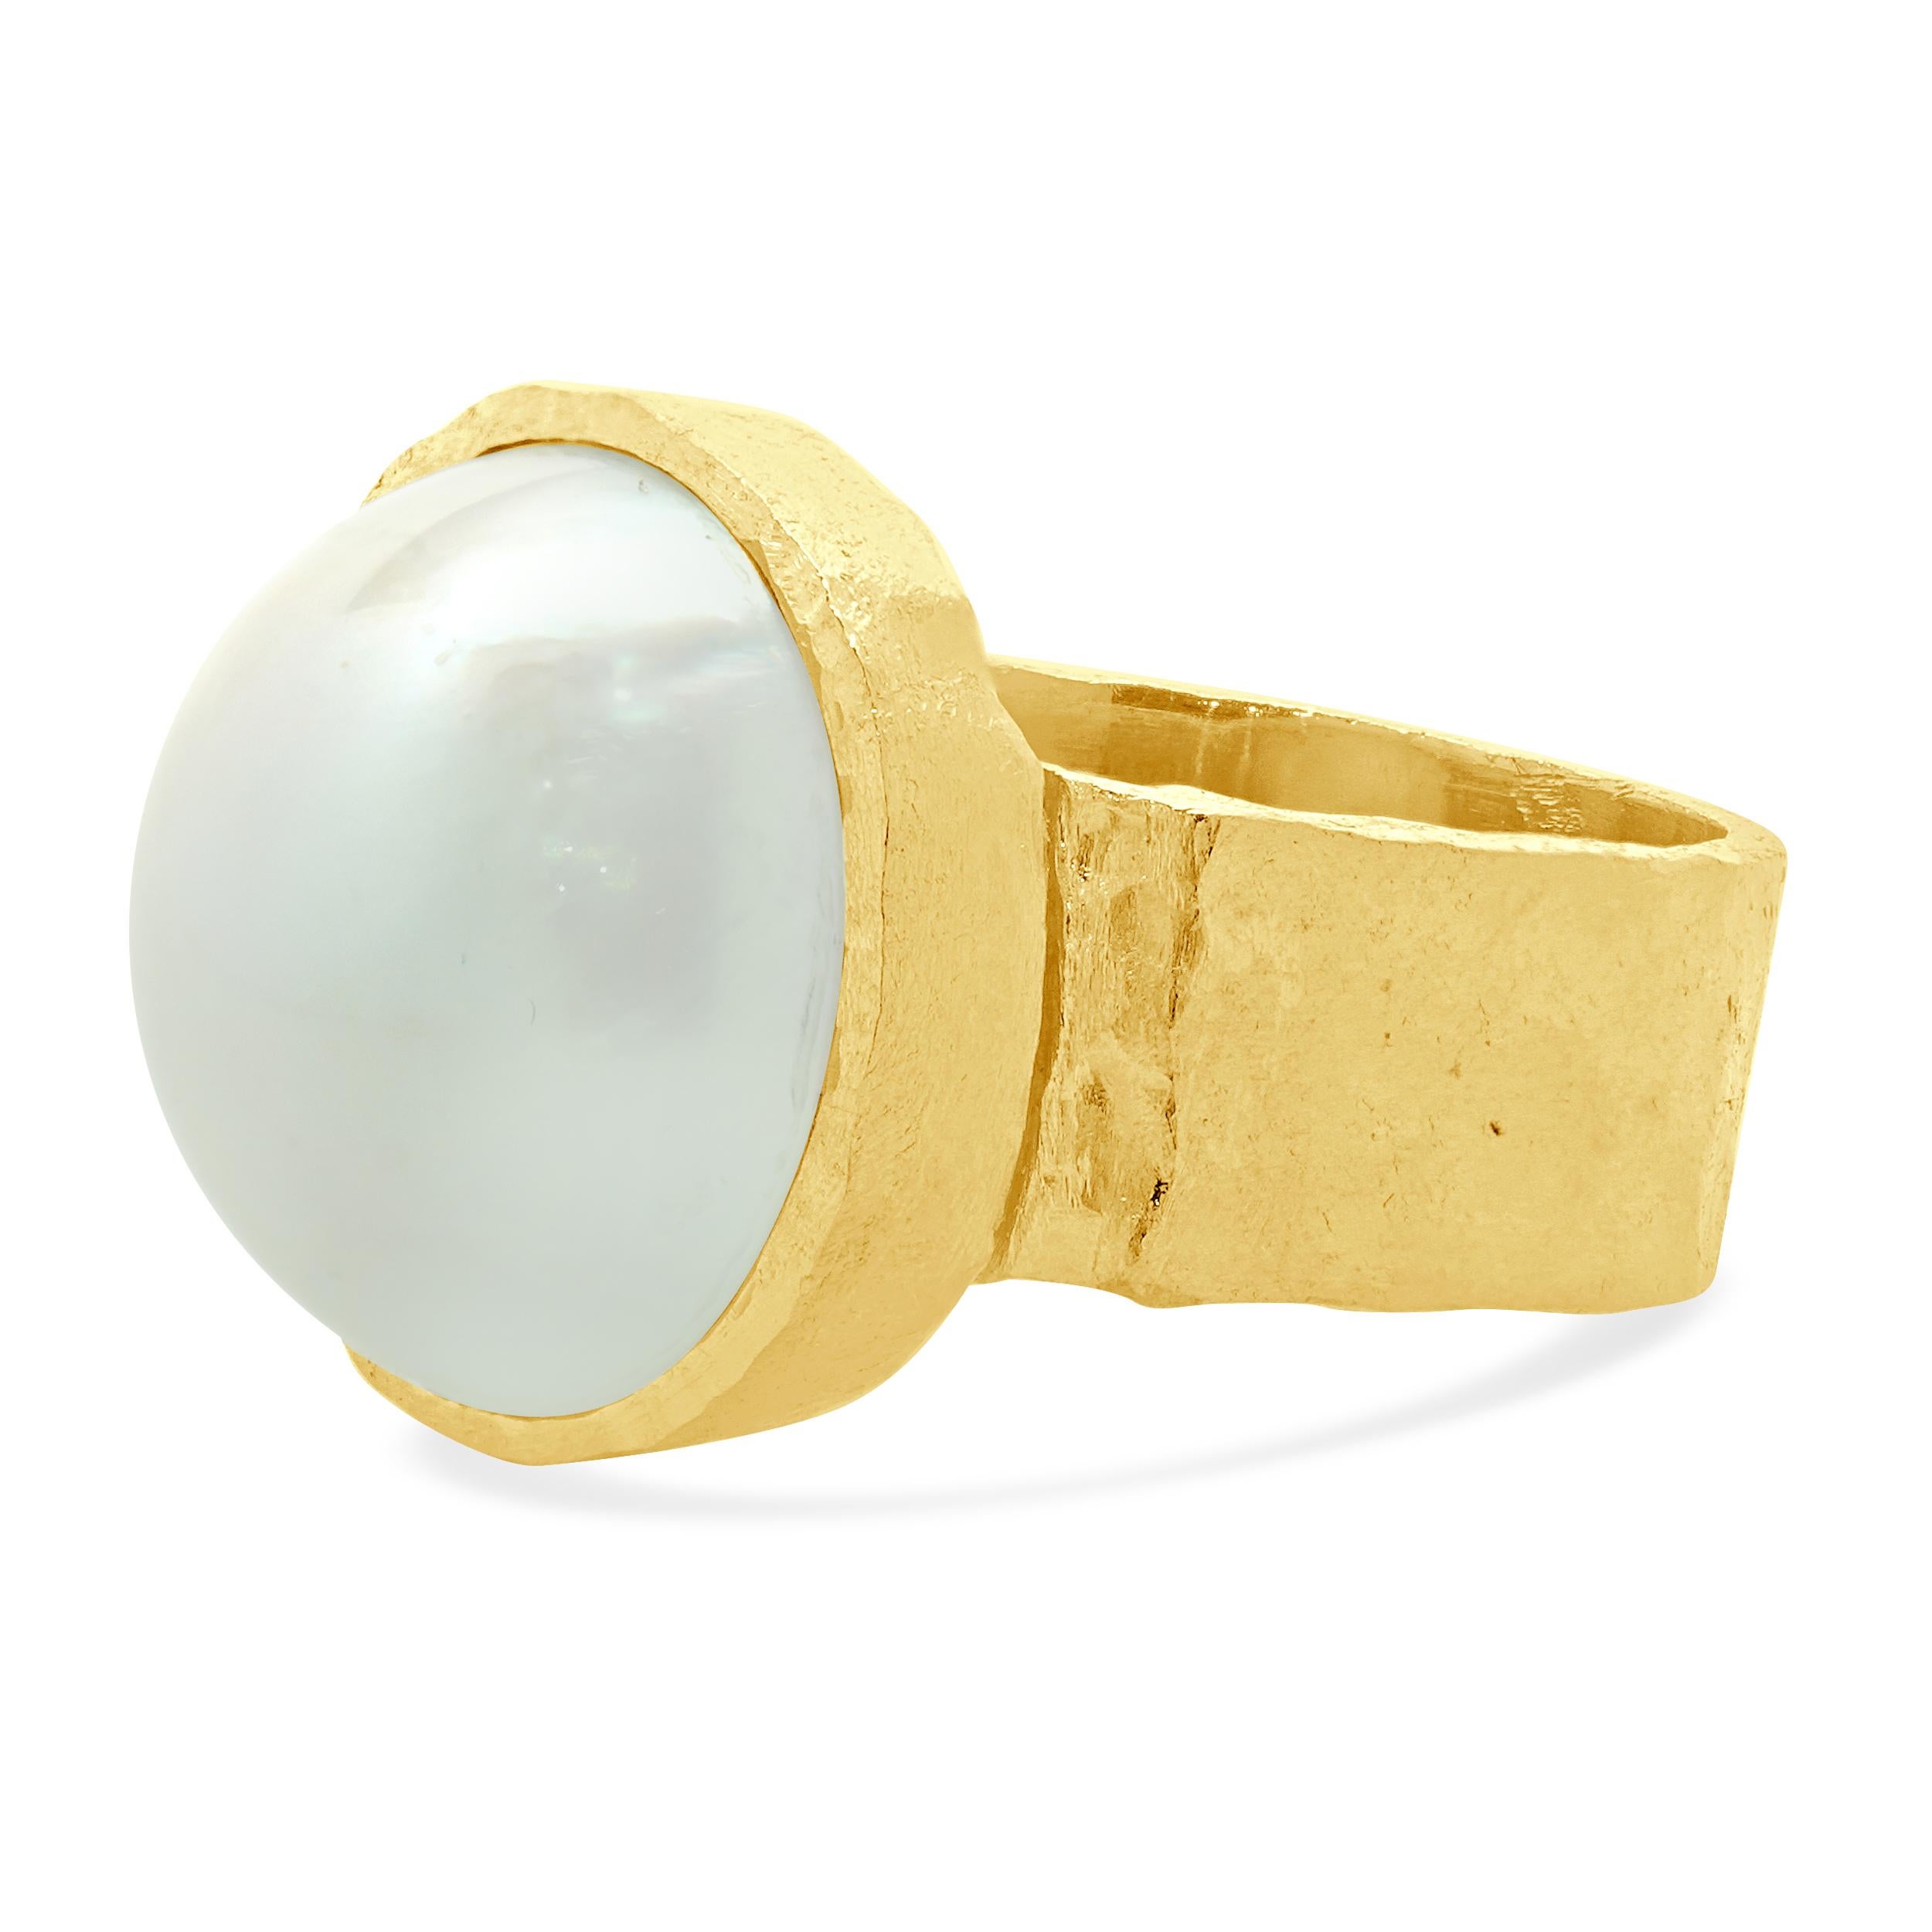 Designer: custom
Material: 18K yellow gold 
Weight: 13.54 grams
Dimensions: ring top measures 17mm wide
Size: 7.75 (complimentary sizing available)